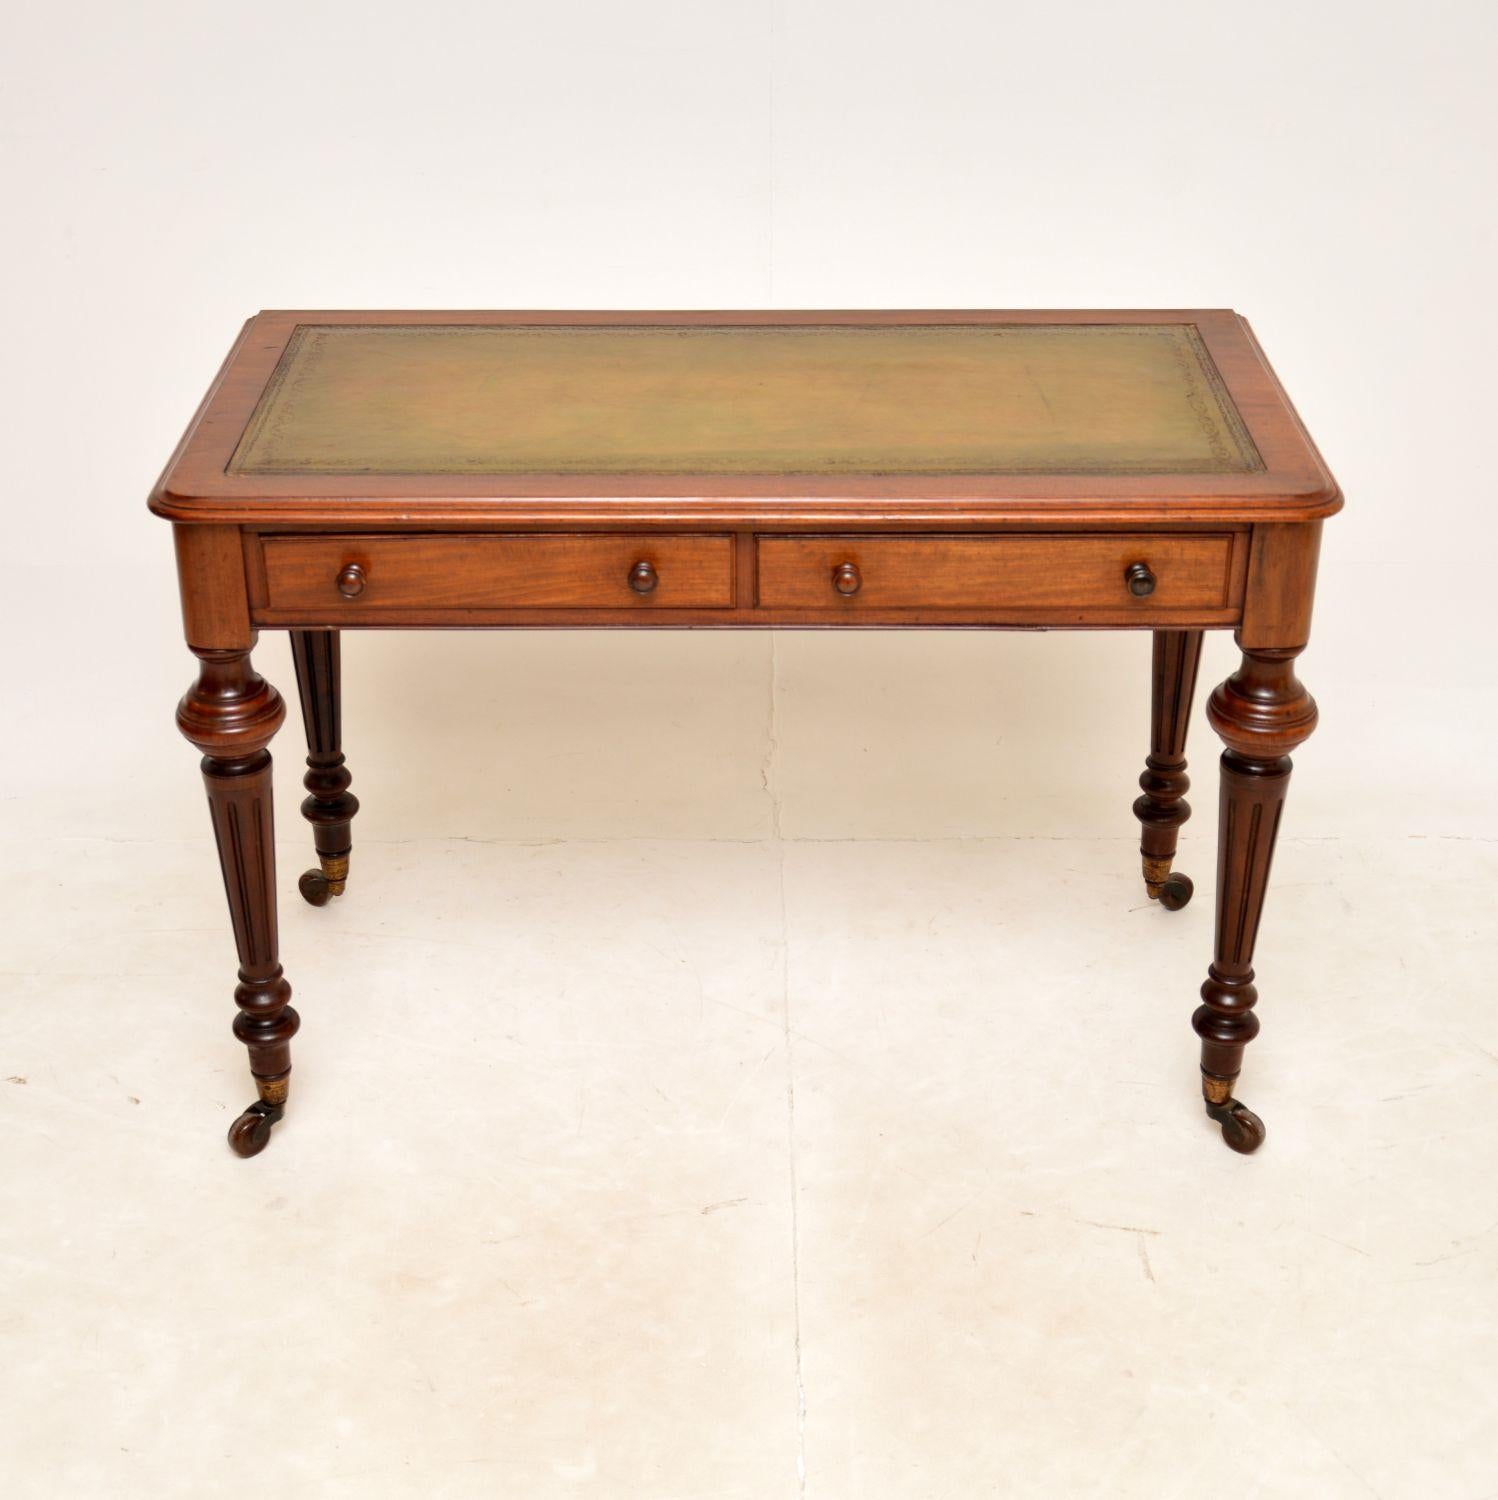 An excellent antique Victorian leather top writing desk. This was made in England, it dates from around the 1850-1870 period.

The quality is amazing, this sits on beautifully turned and fluted legs, terminating in porcelain casters. The drawers